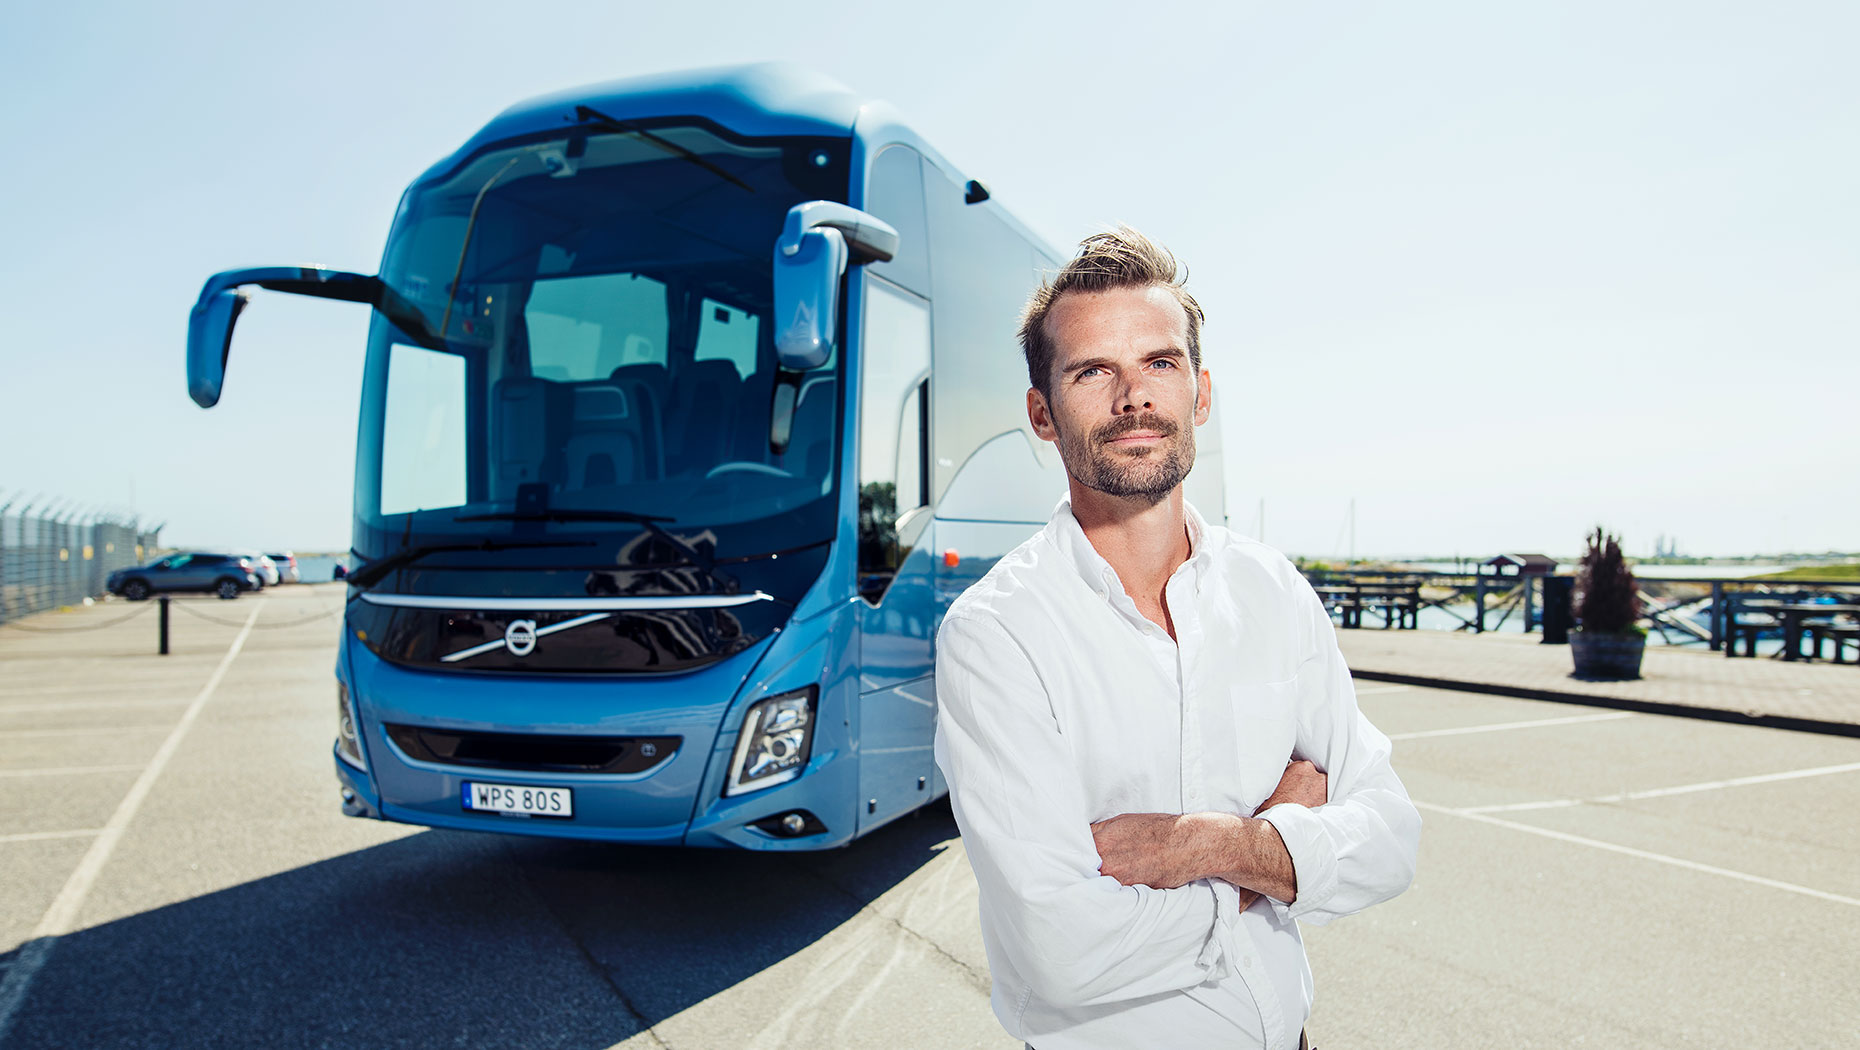 Volvo focuses on safety during pandemic